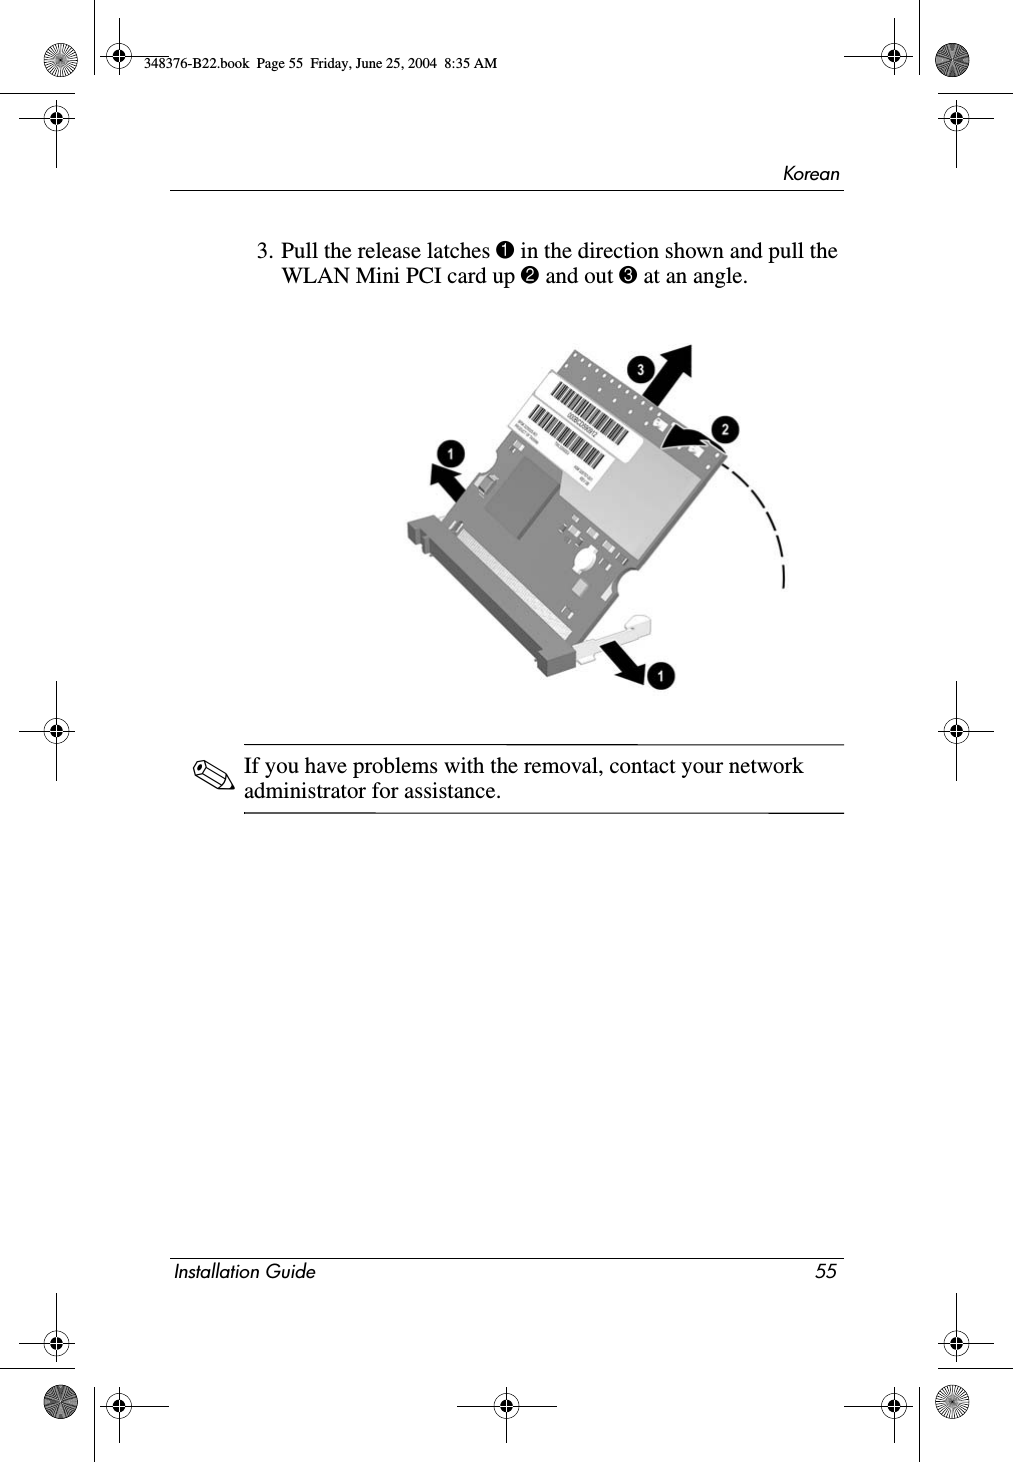 KoreanInstallation Guide 553. Pull the release latches 1 in the direction shown and pull the WLAN Mini PCI card up 2 and out 3 at an angle.✎If you have problems with the removal, contact your network administrator for assistance.348376-B22.book  Page 55  Friday, June 25, 2004  8:35 AM